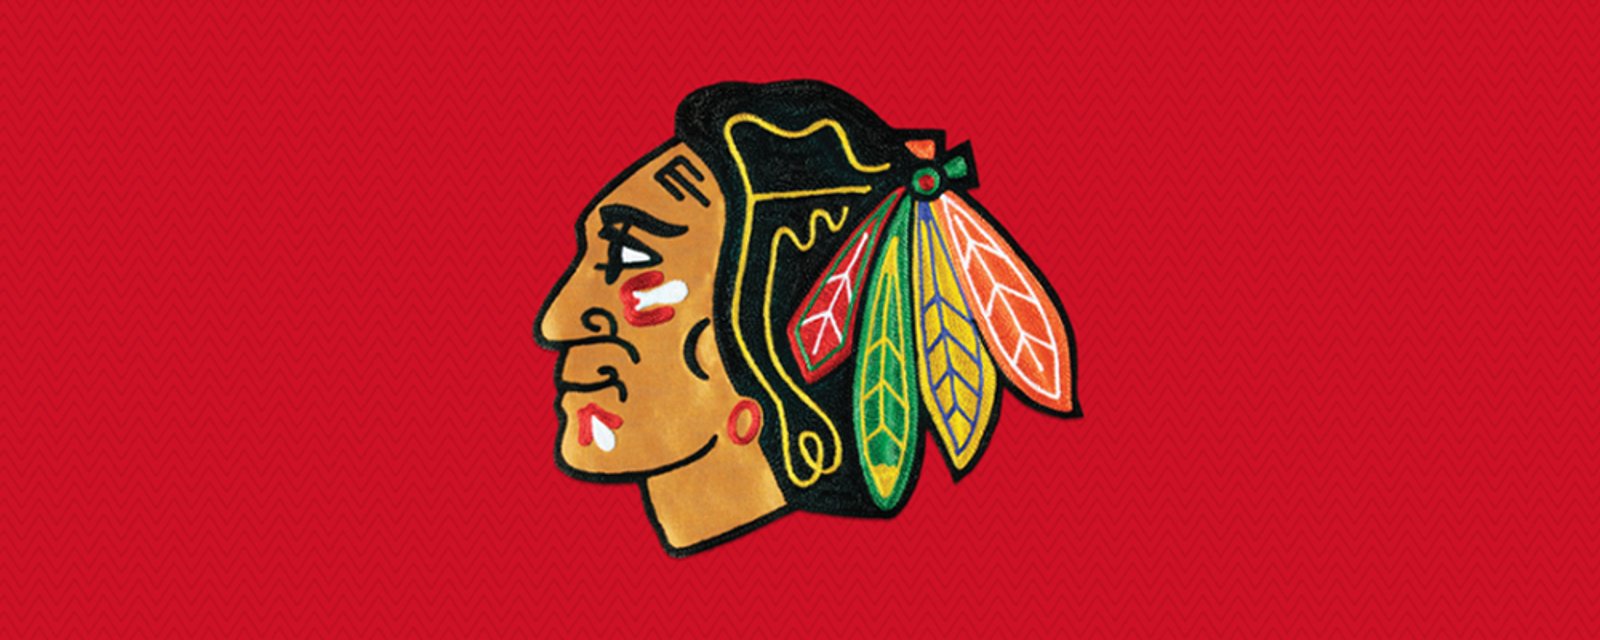 Blackhawks make a huge firing and completely shake up their management team